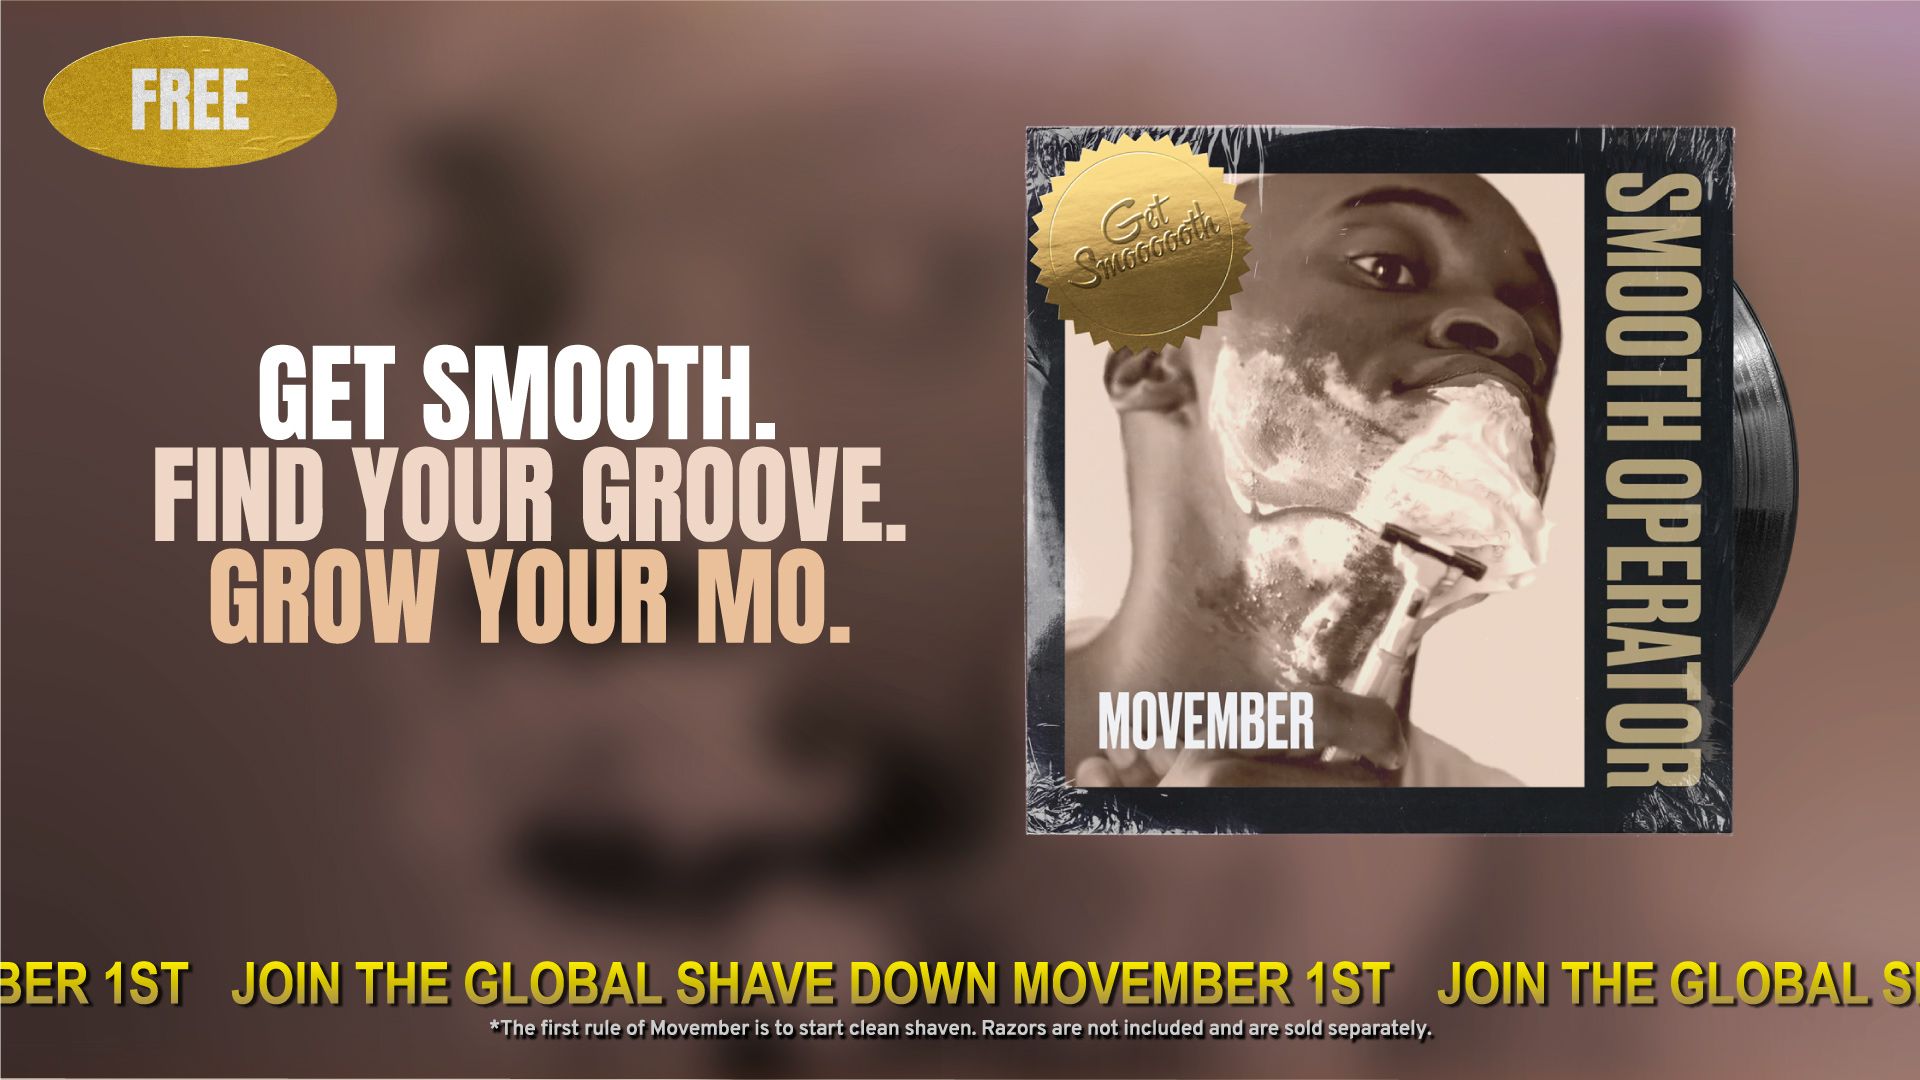 A graphic promoting Movember's global Shave Down.